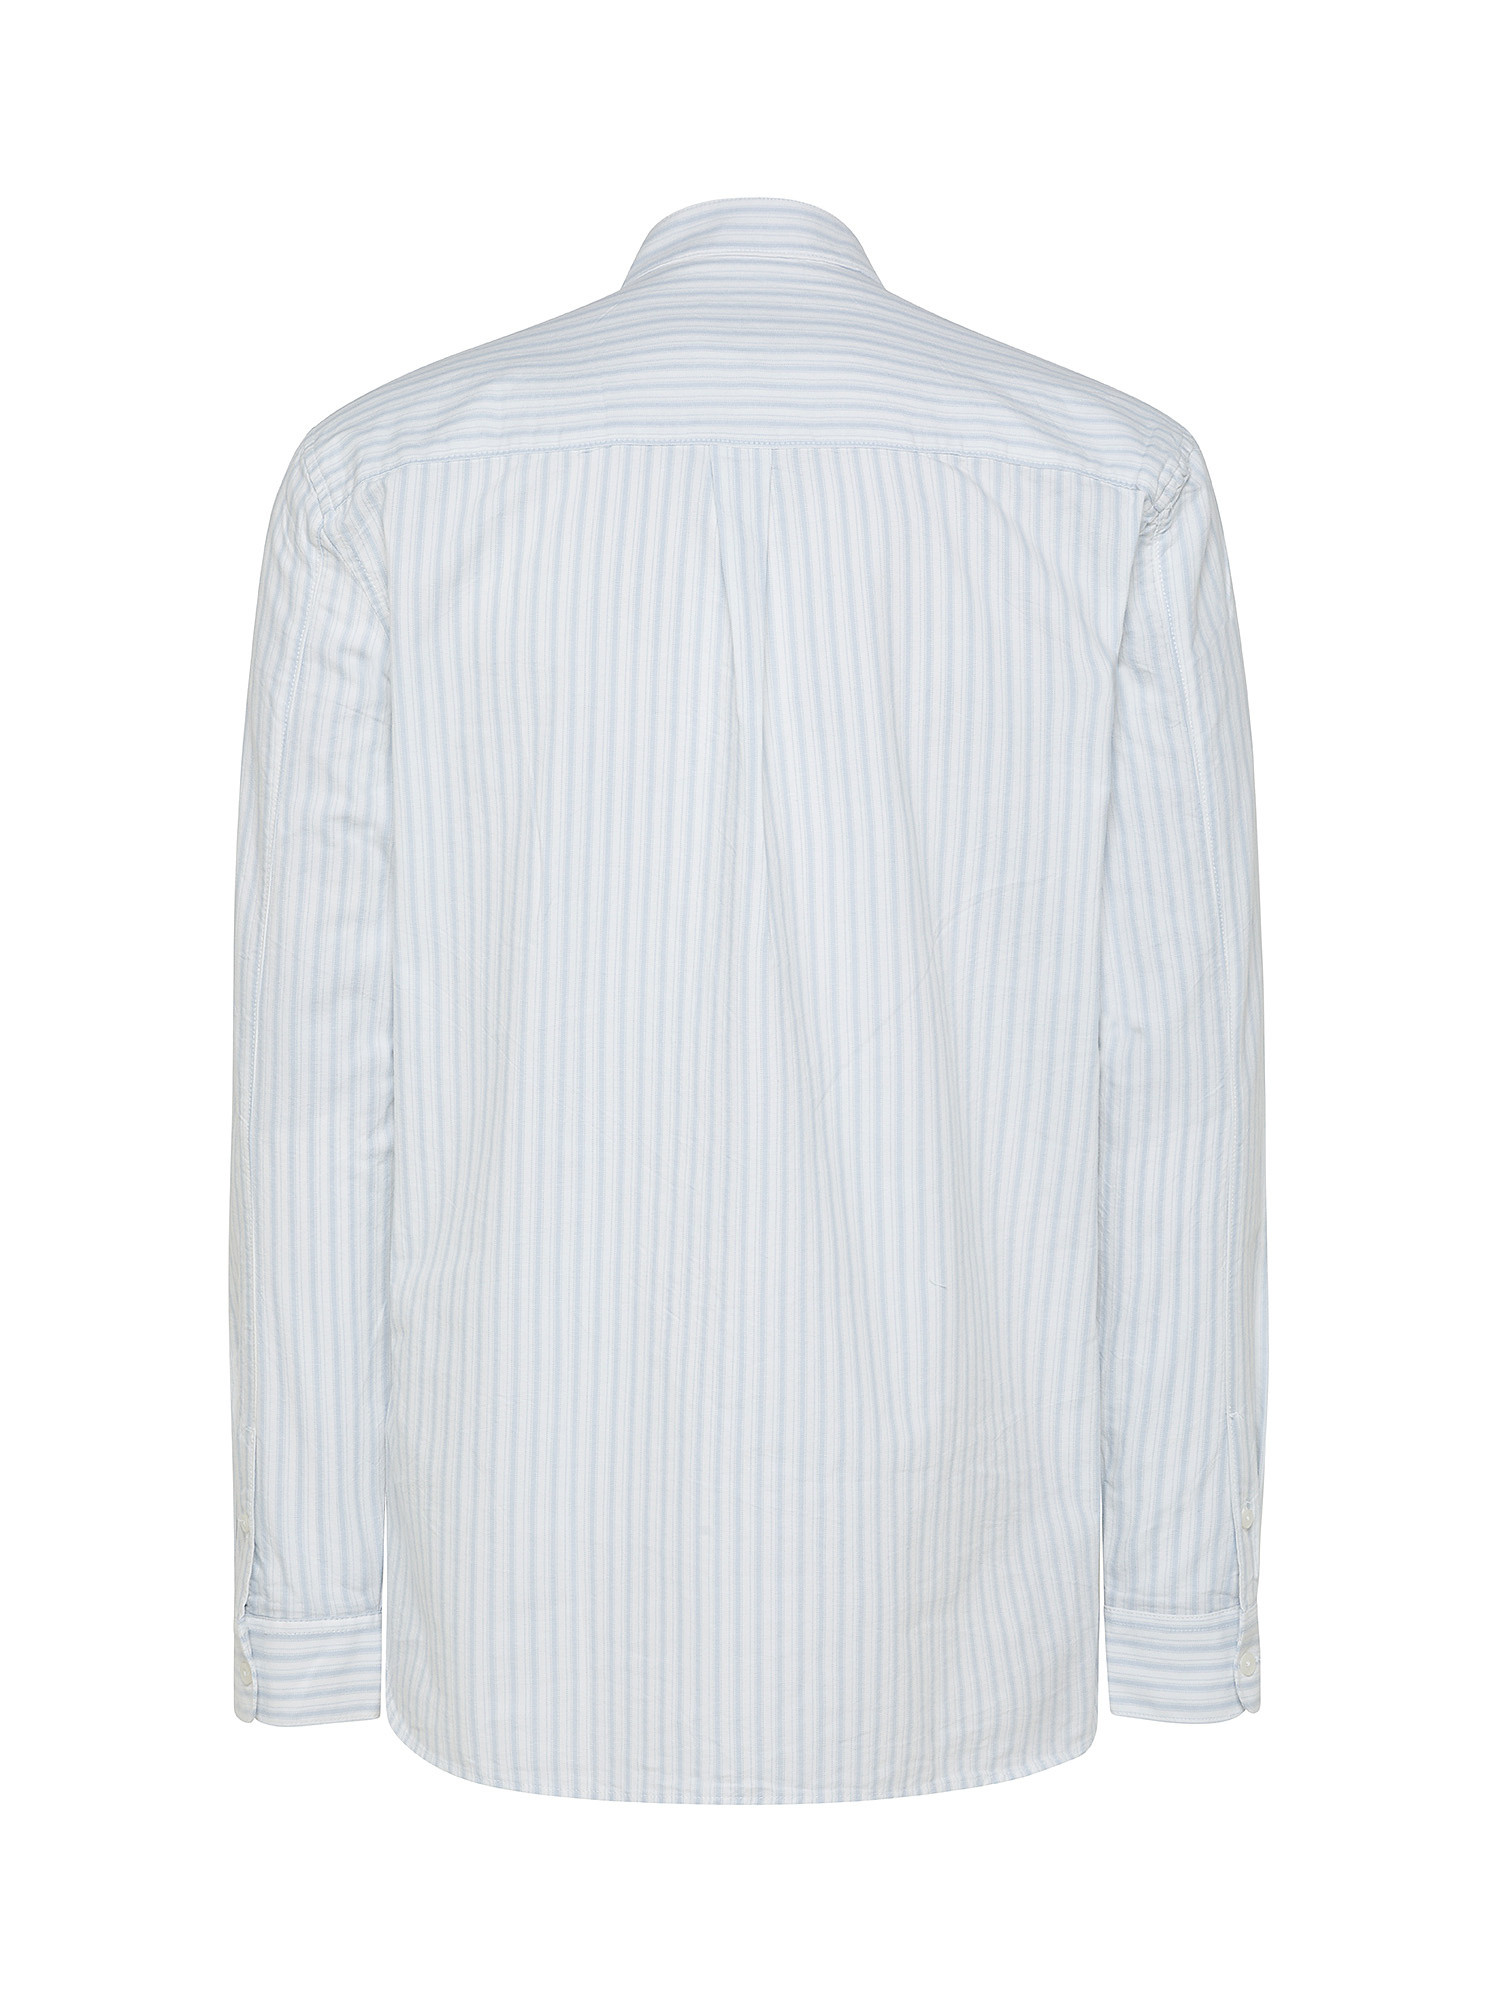 Pepe Jeans - Camicia a righe regular fit, Bianco, large image number 2